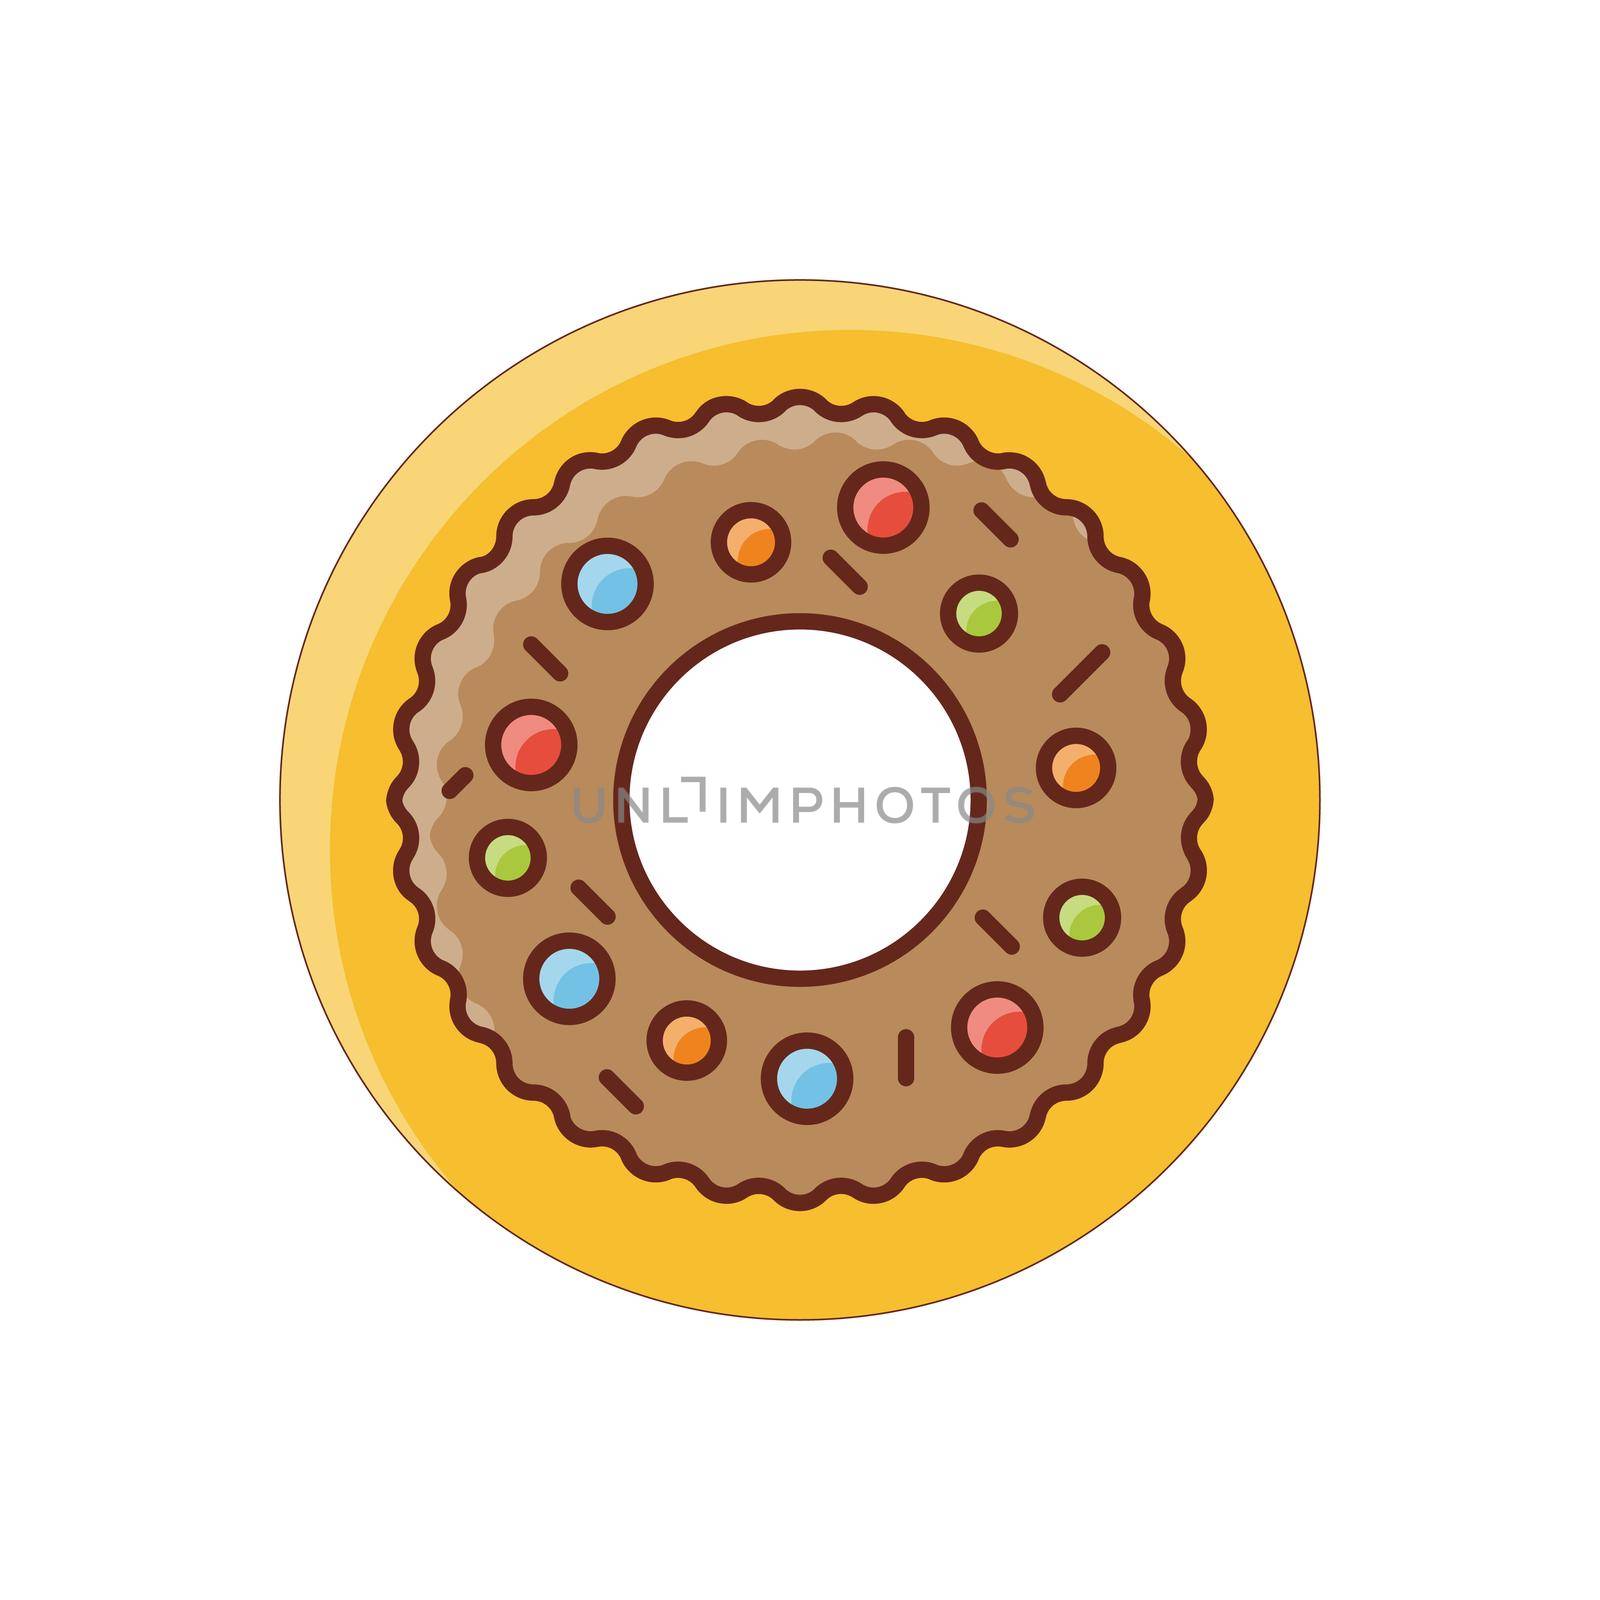 donuts by FlaticonsDesign